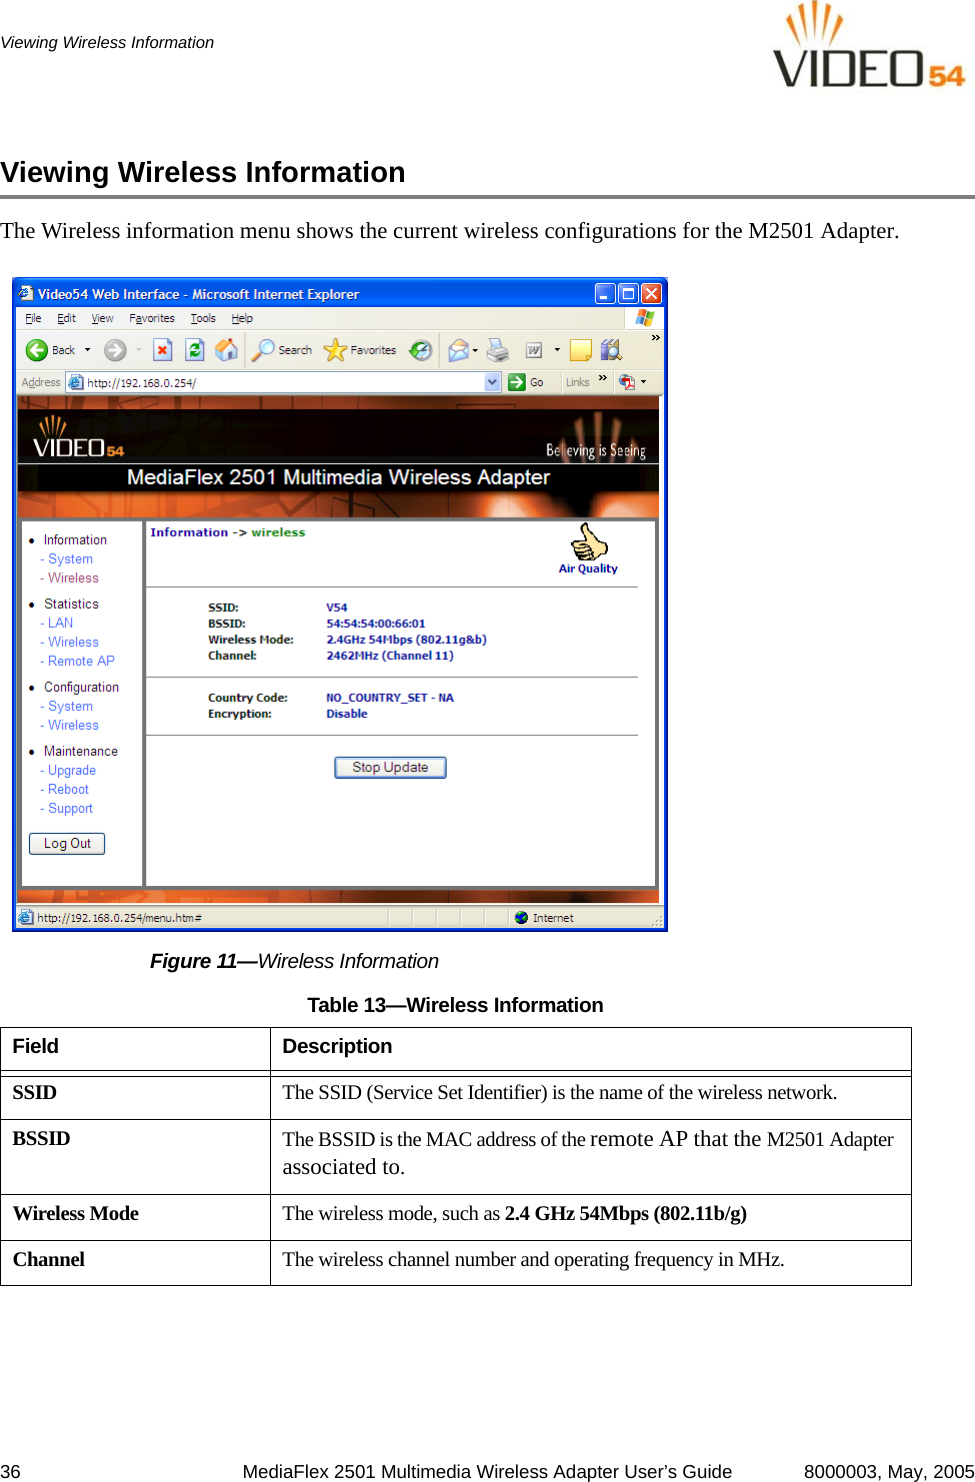 36 MediaFlex 2501 Multimedia Wireless Adapter User’s Guide 8000003, May, 2005Viewing Wireless InformationViewing Wireless InformationThe Wireless information menu shows the current wireless configurations for the M2501 Adapter.Figure 11—Wireless InformationTable 13—Wireless InformationField DescriptionSSID The SSID (Service Set Identifier) is the name of the wireless network. BSSID The BSSID is the MAC address of the remote AP that the M2501 Adapter associated to.Wireless Mode The wireless mode, such as 2.4 GHz 54Mbps (802.11b/g)Channel The wireless channel number and operating frequency in MHz.